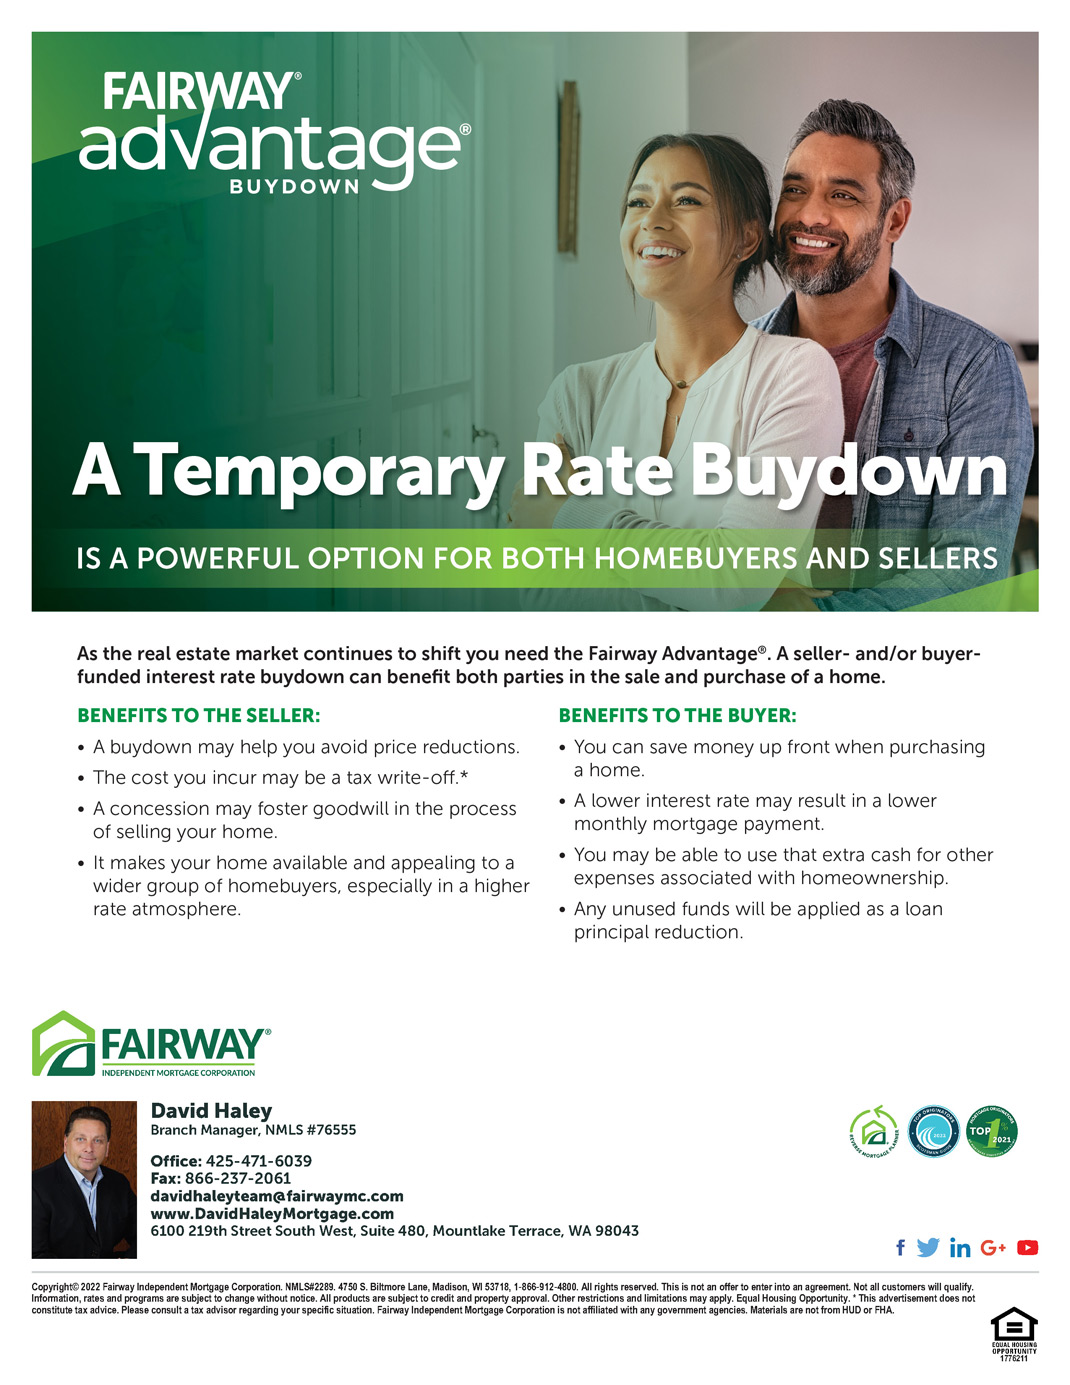 Temporary Rate Buydown